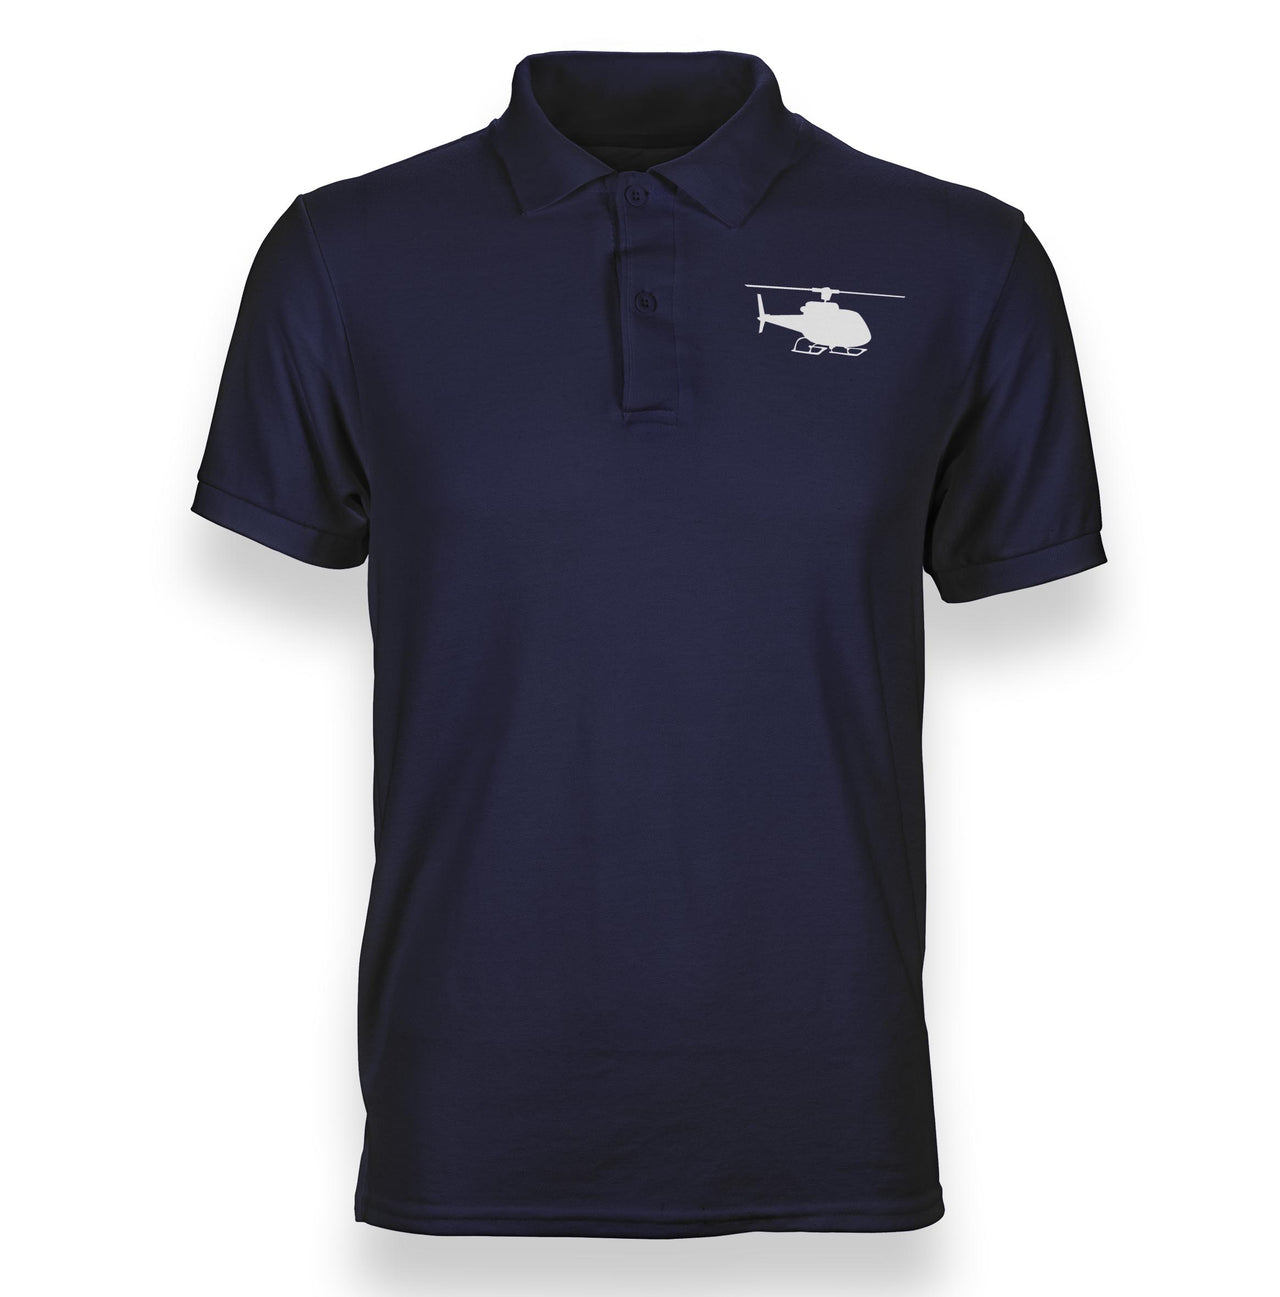 Helicopter Silhouette Designed Polo T-Shirts